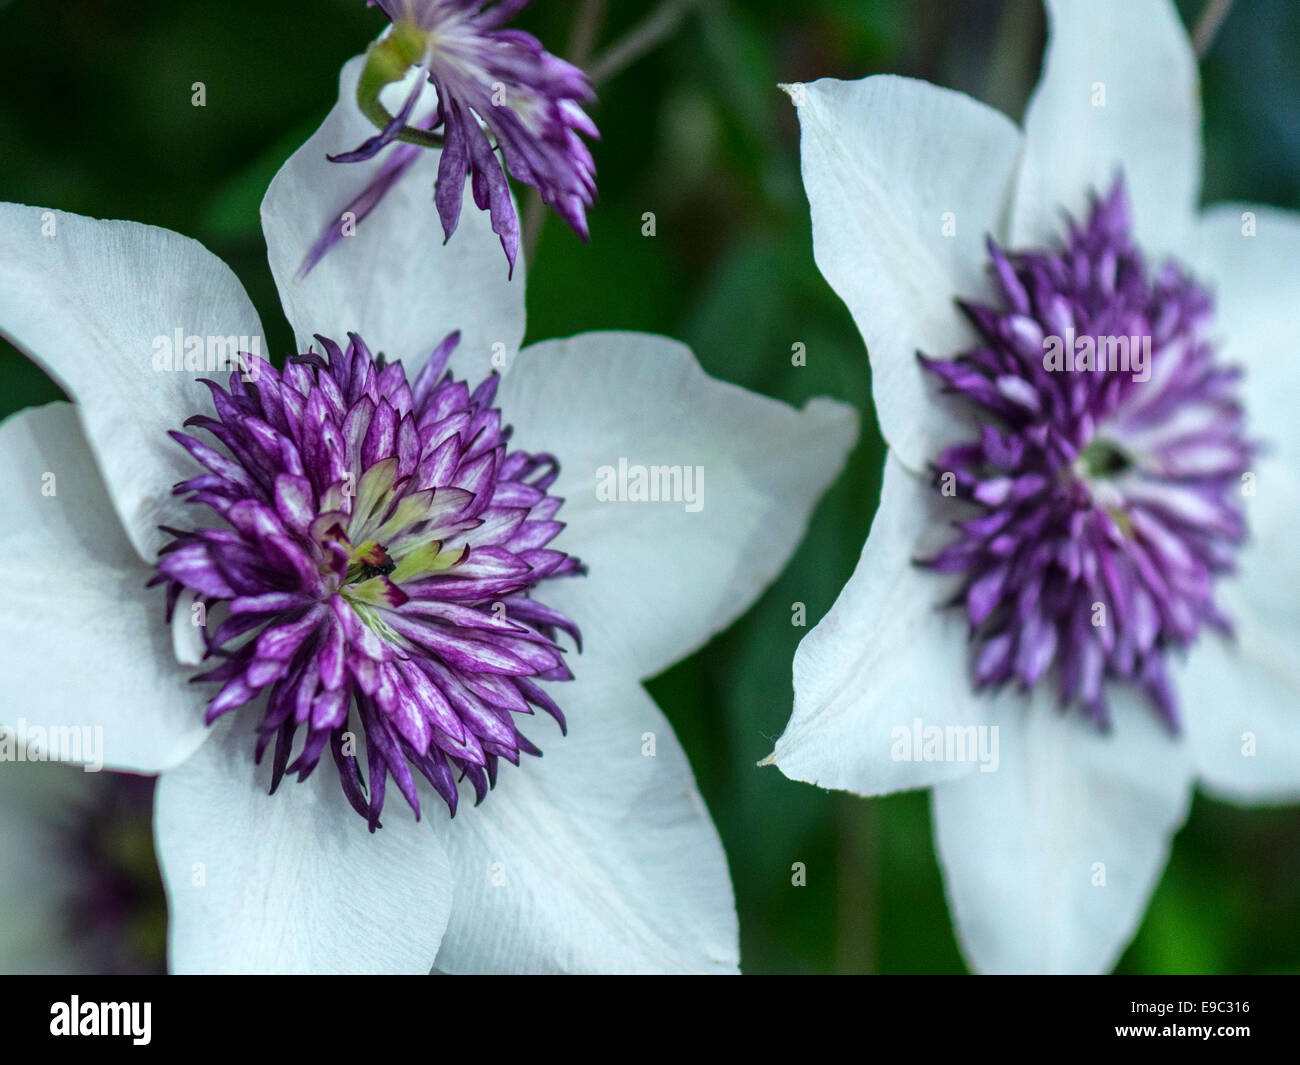 Stunning Clematis specimen with purple petals and white sepals, green foiage background. Stock Photo